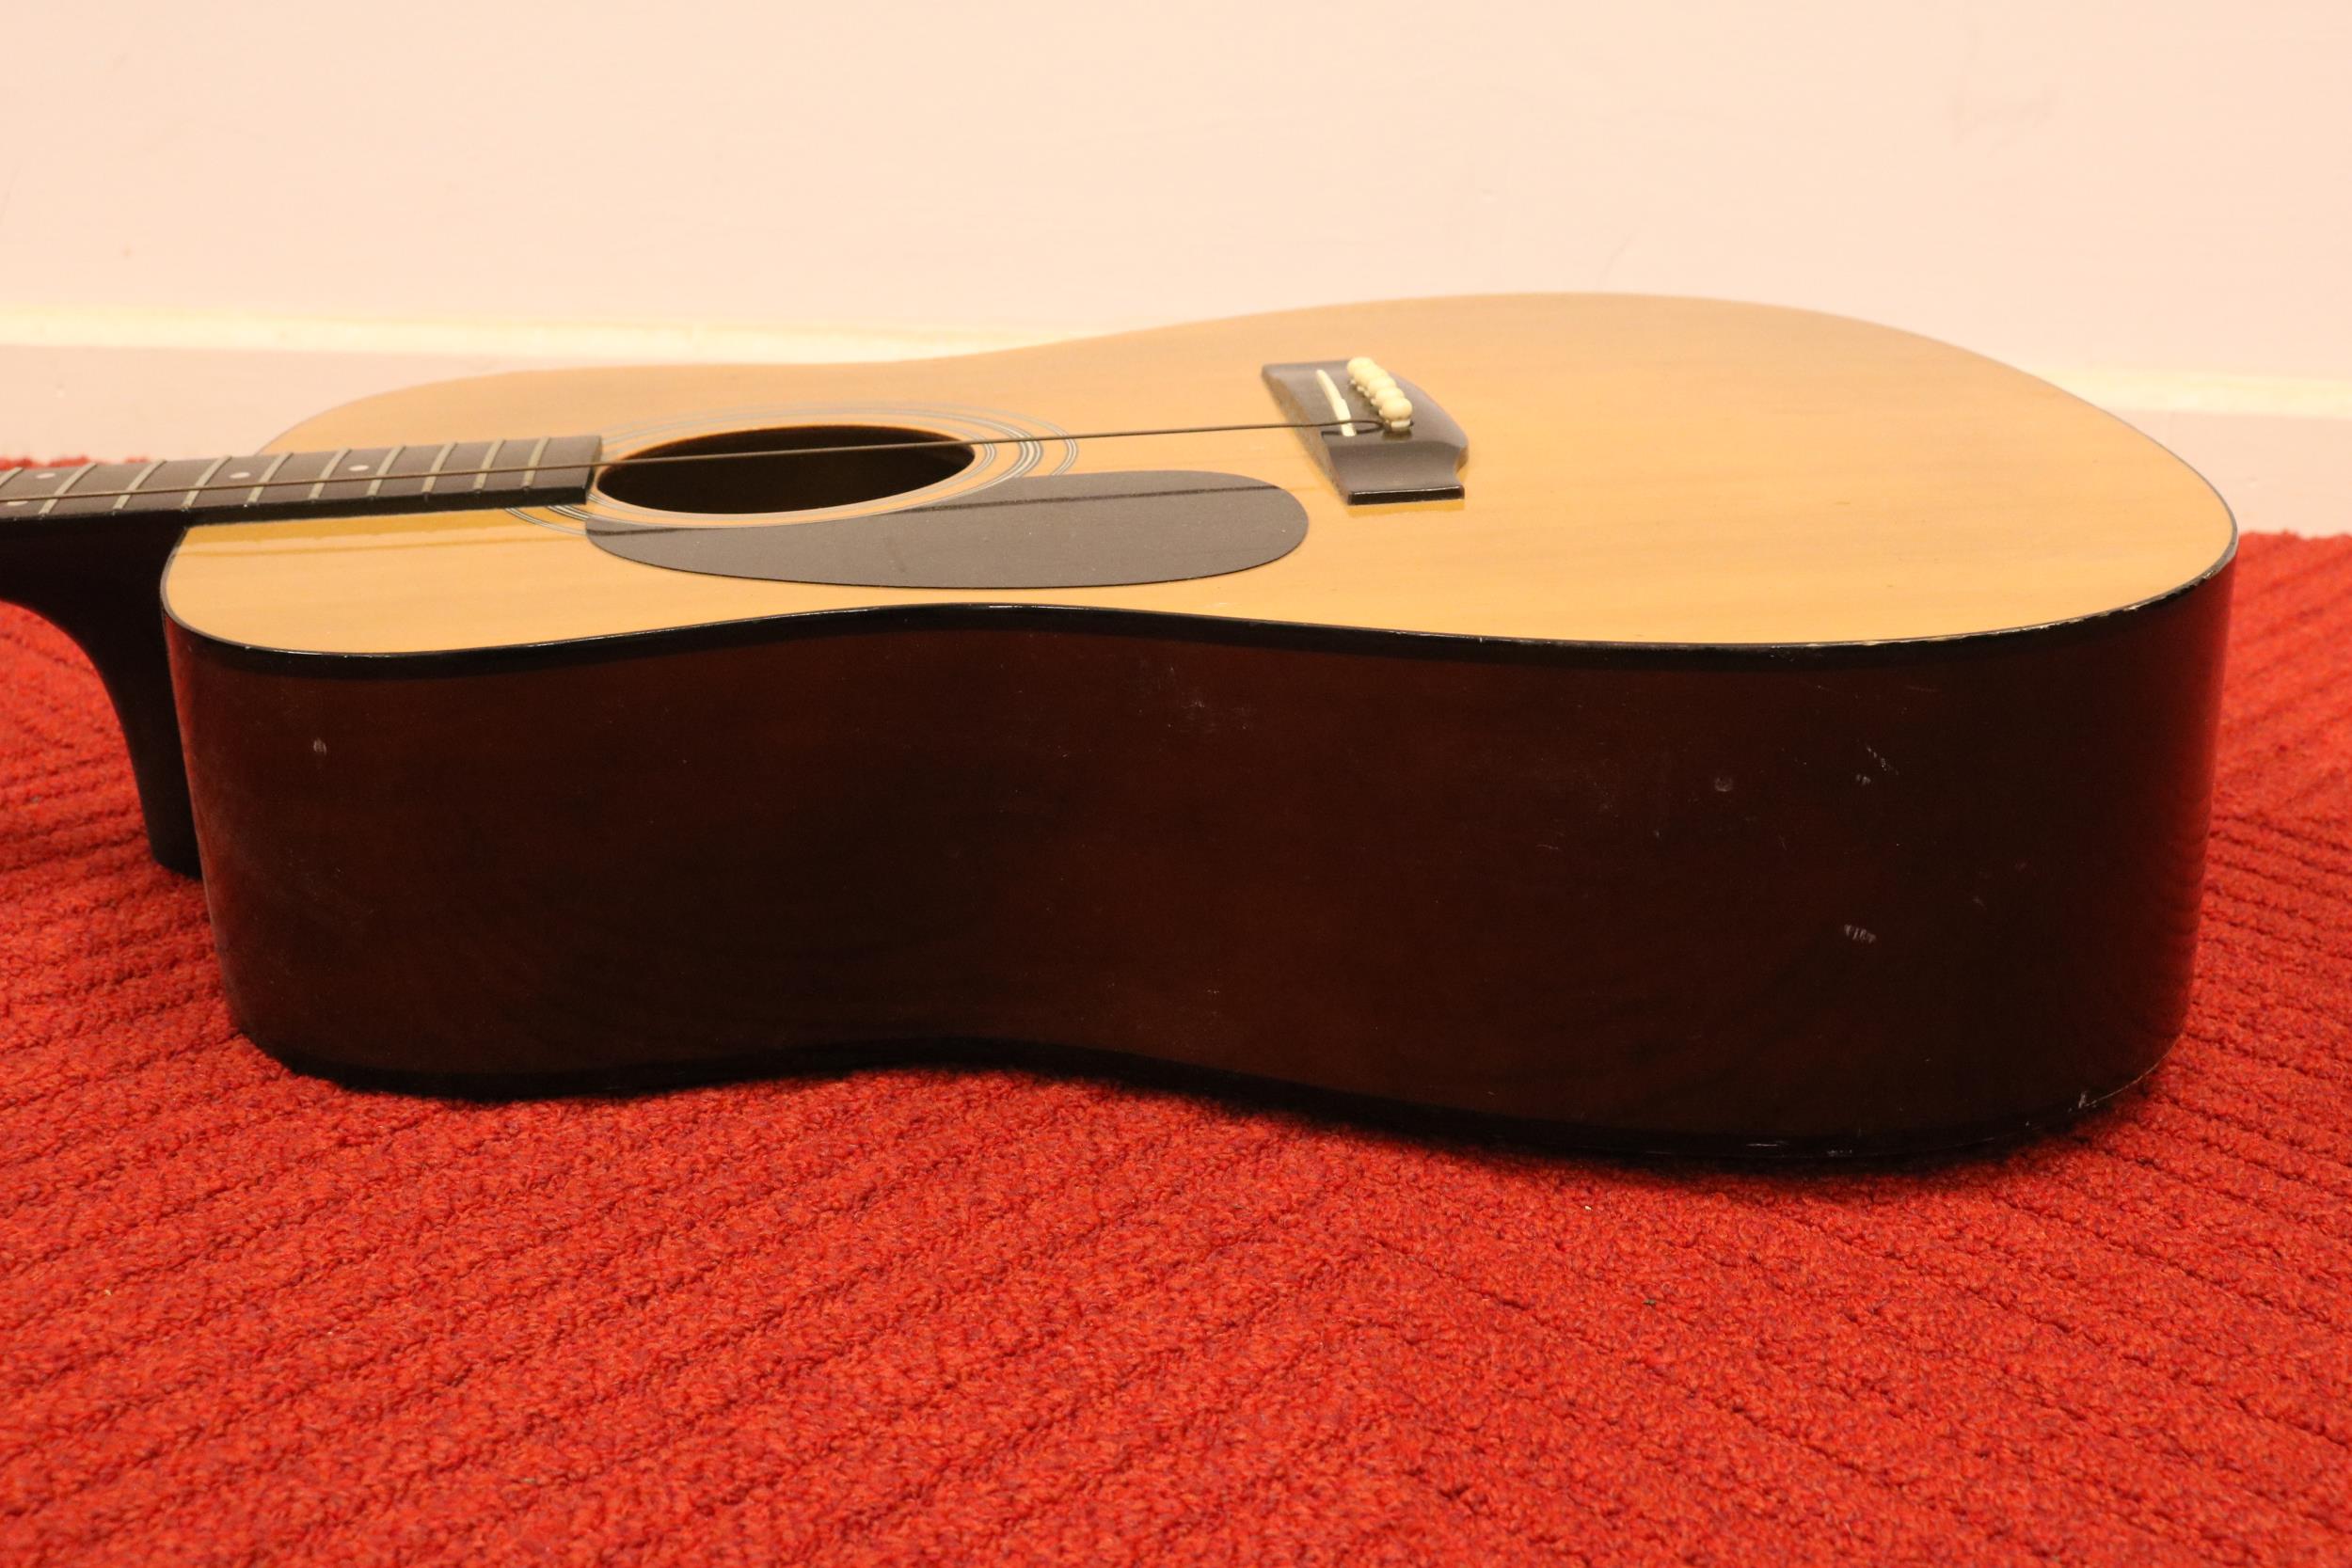 Ramon acoustic Guitar Model Number 4103 - Image 8 of 9